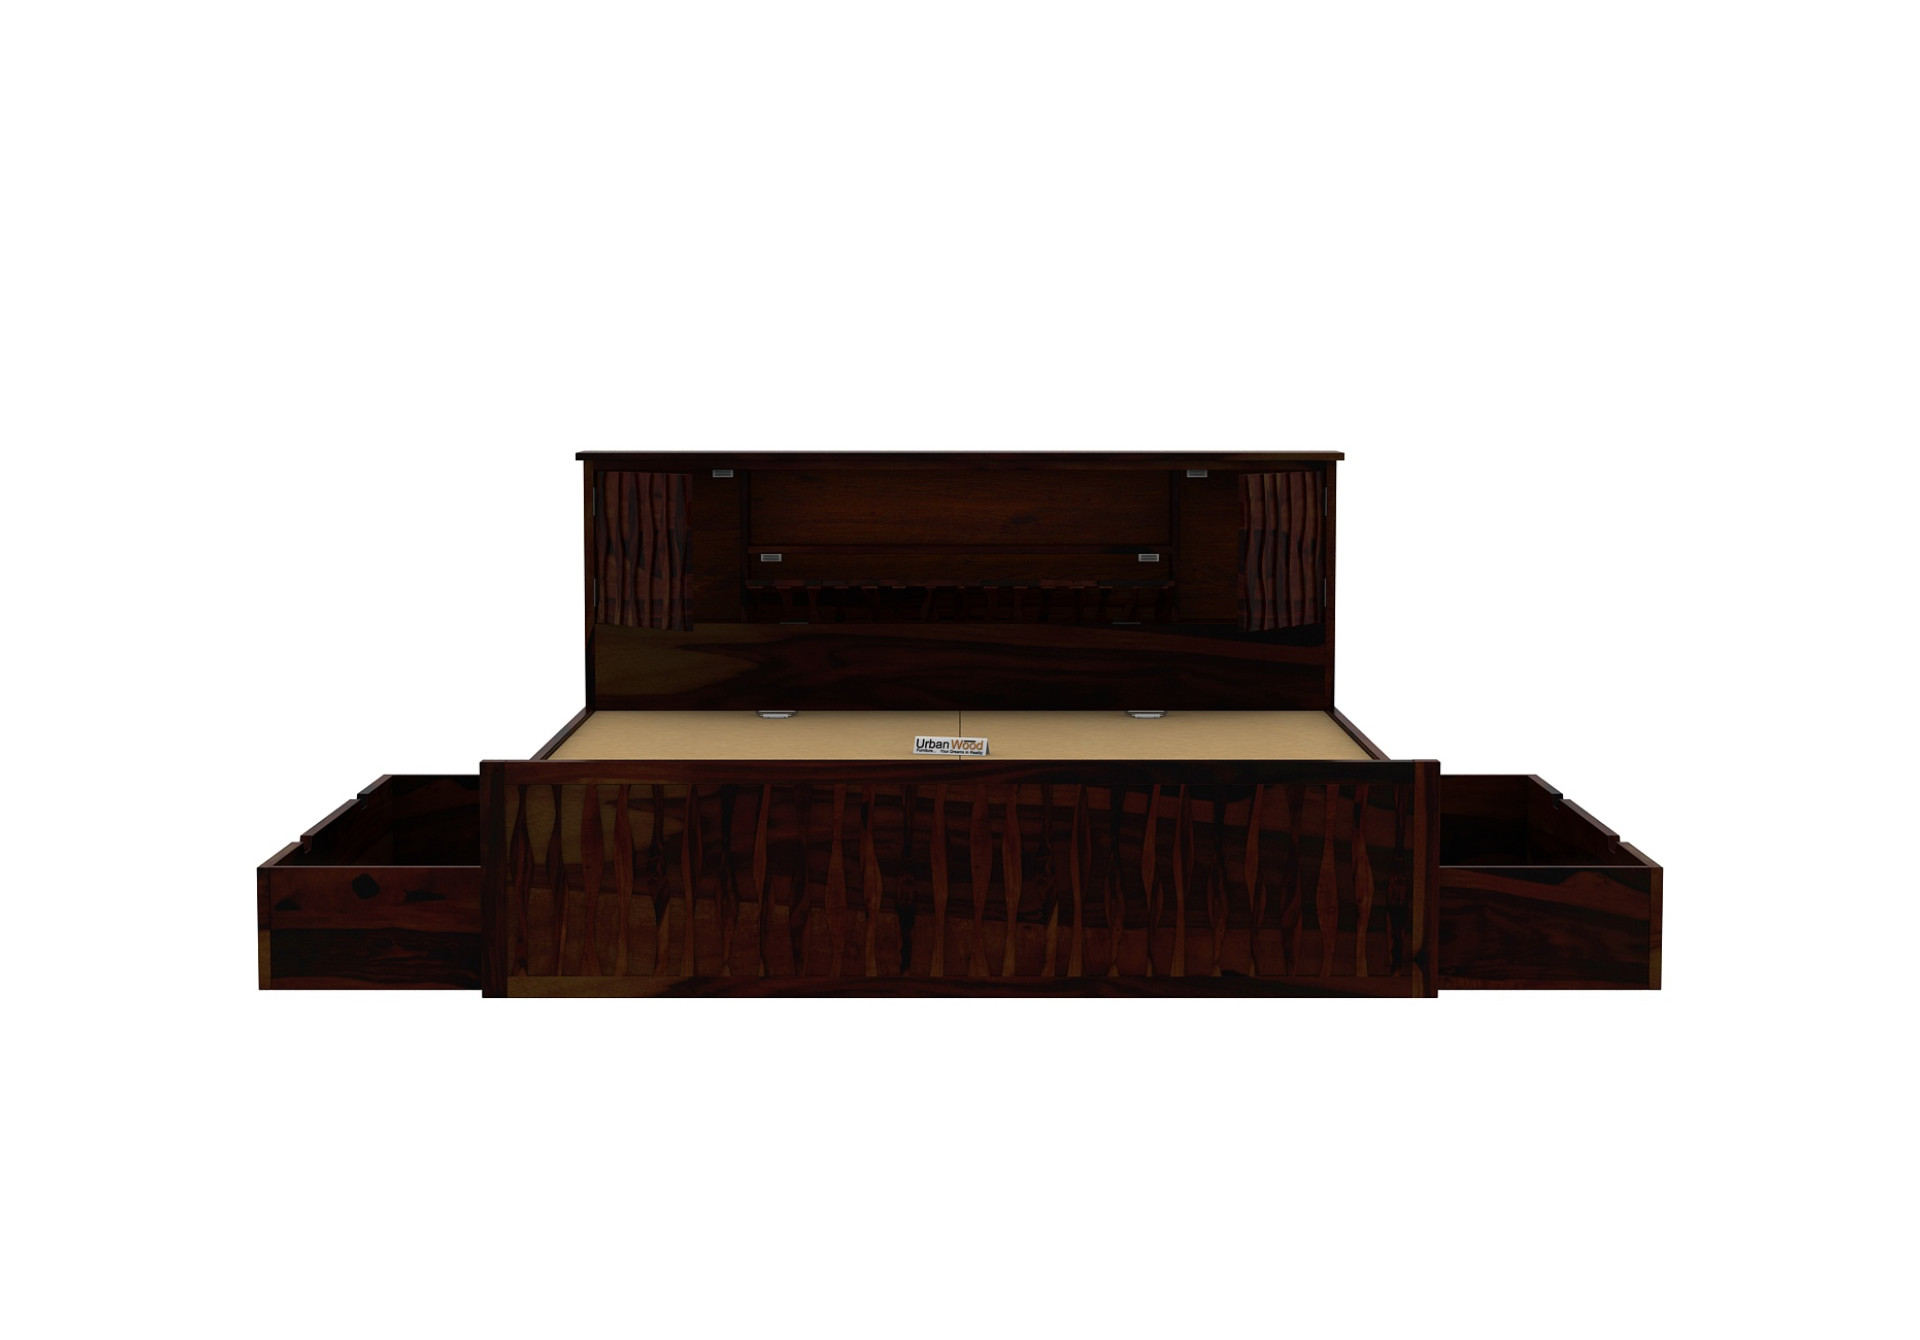 Stack Bed With Drawer Storage ( Queen Size, Walnut Finish )